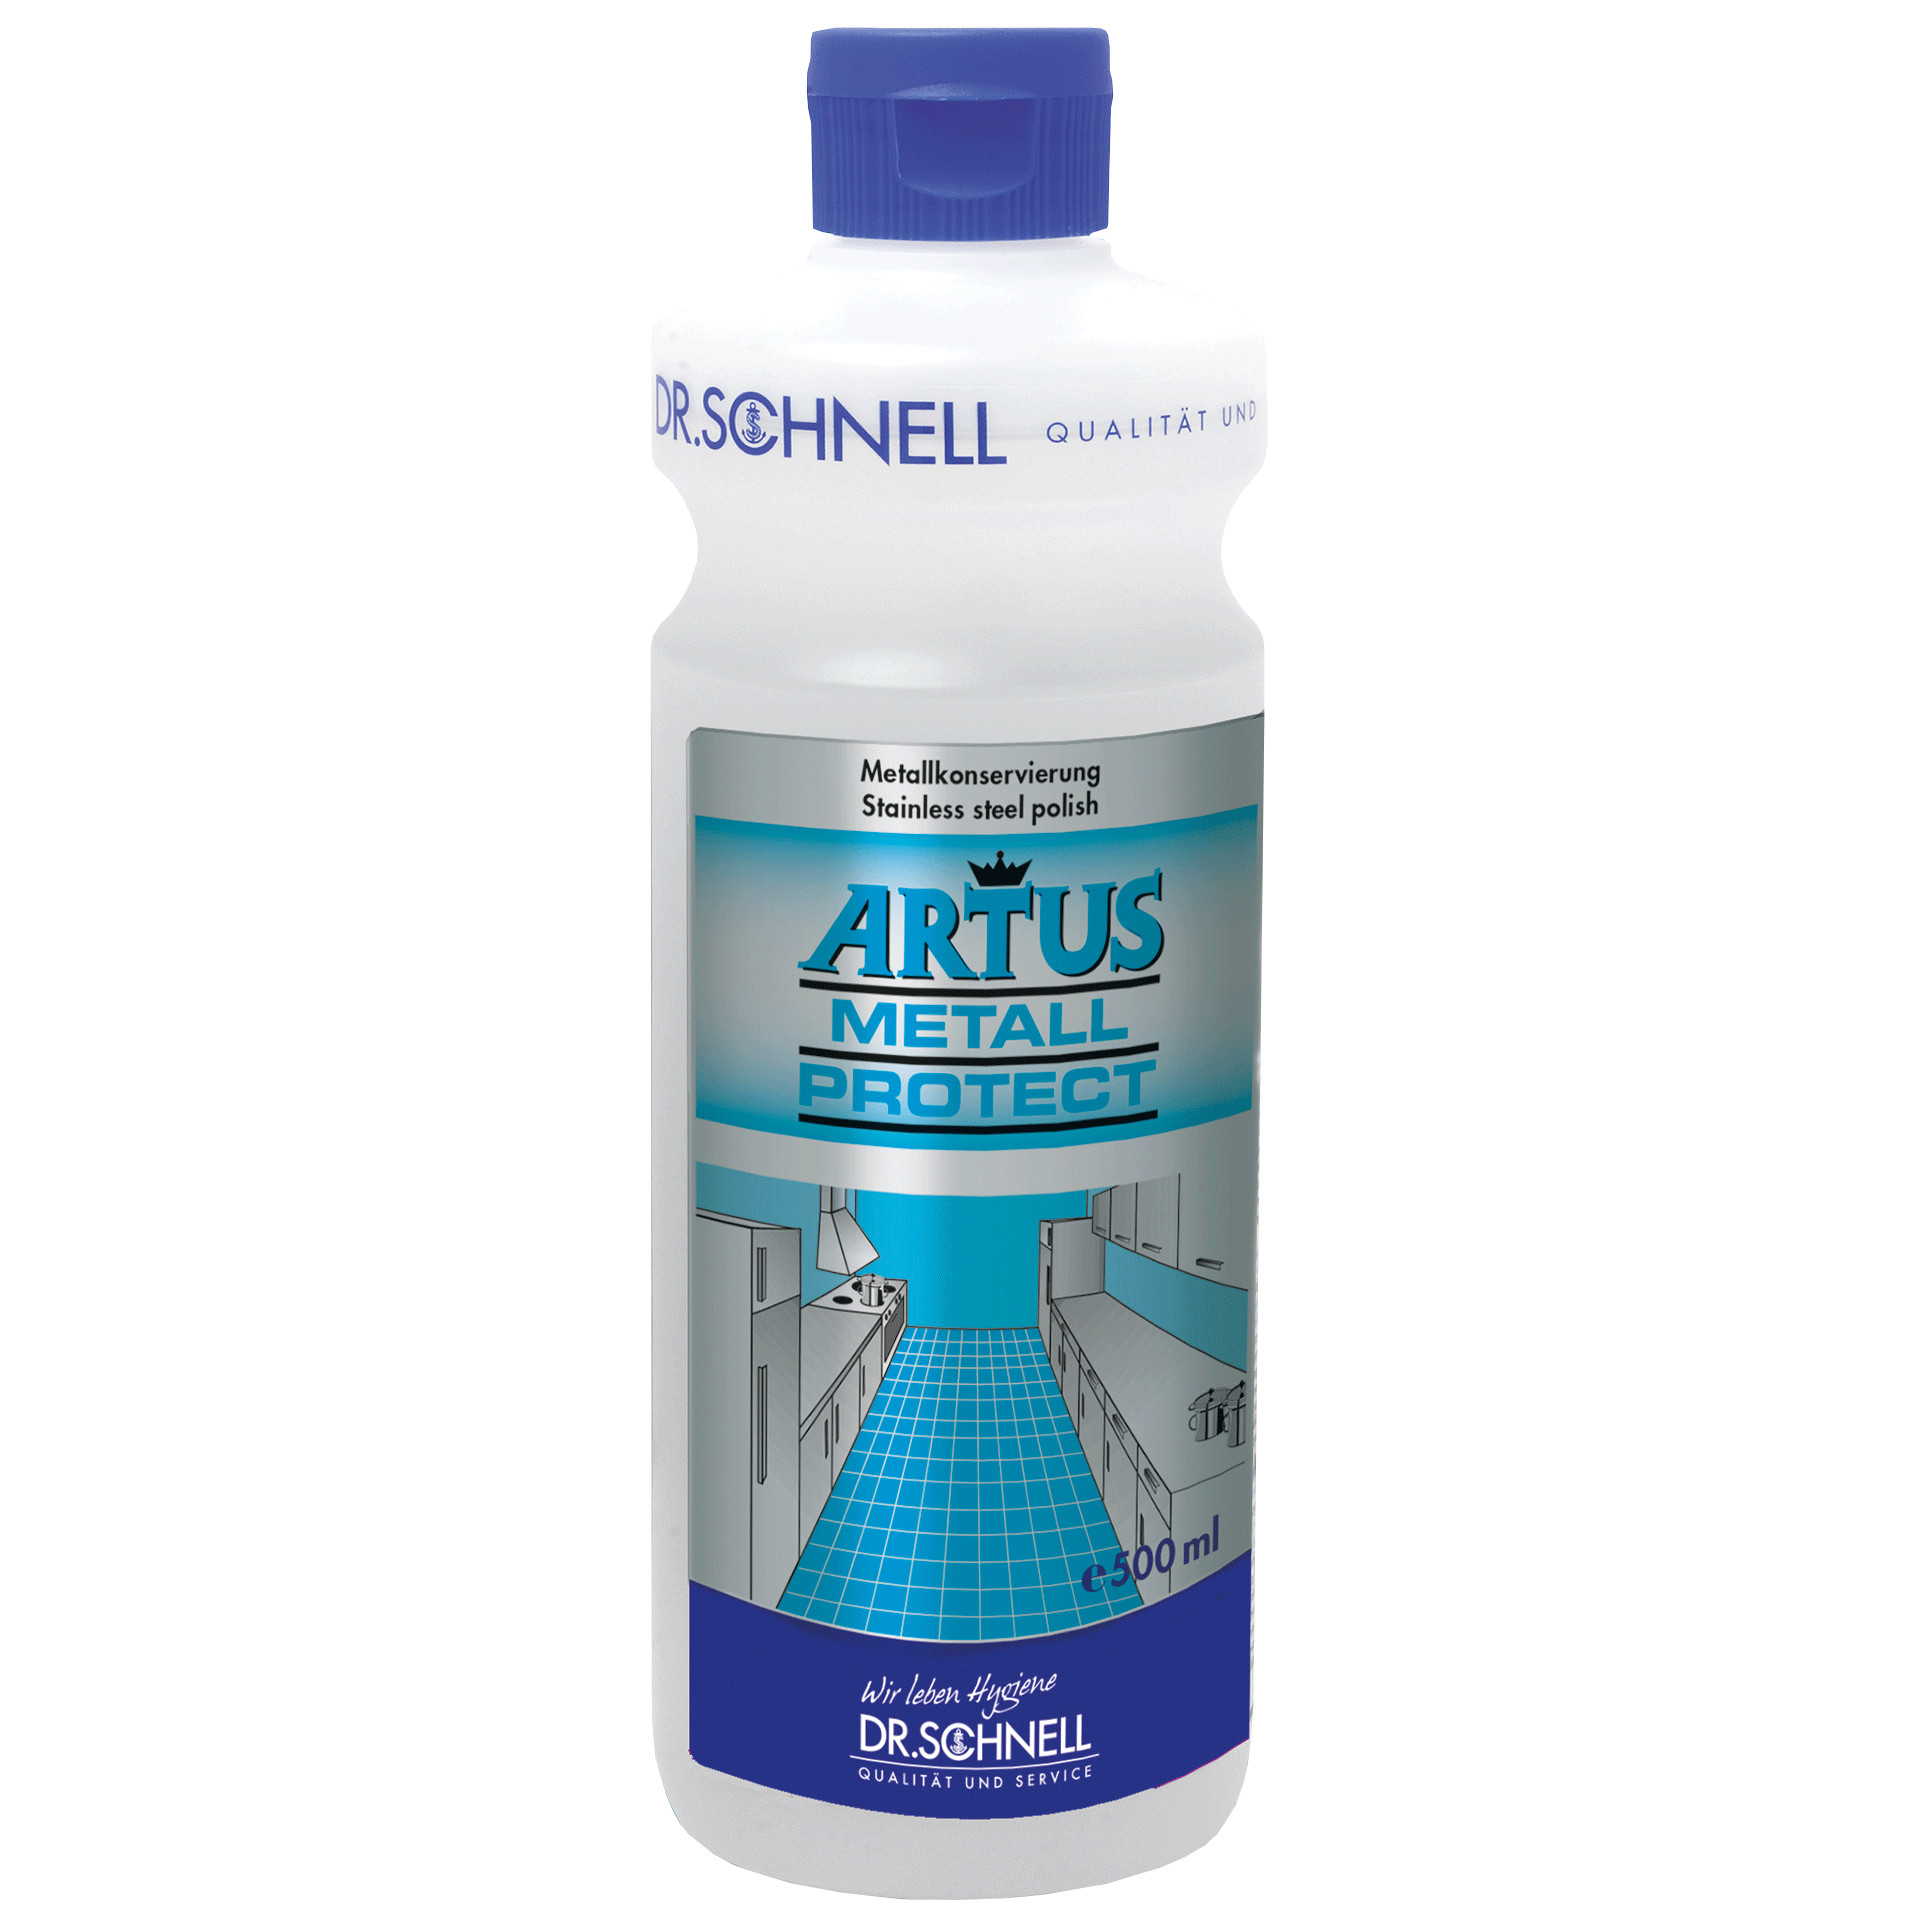 Dr. Schnell Artus Metall Protect 500 ml Edelstahlpflege